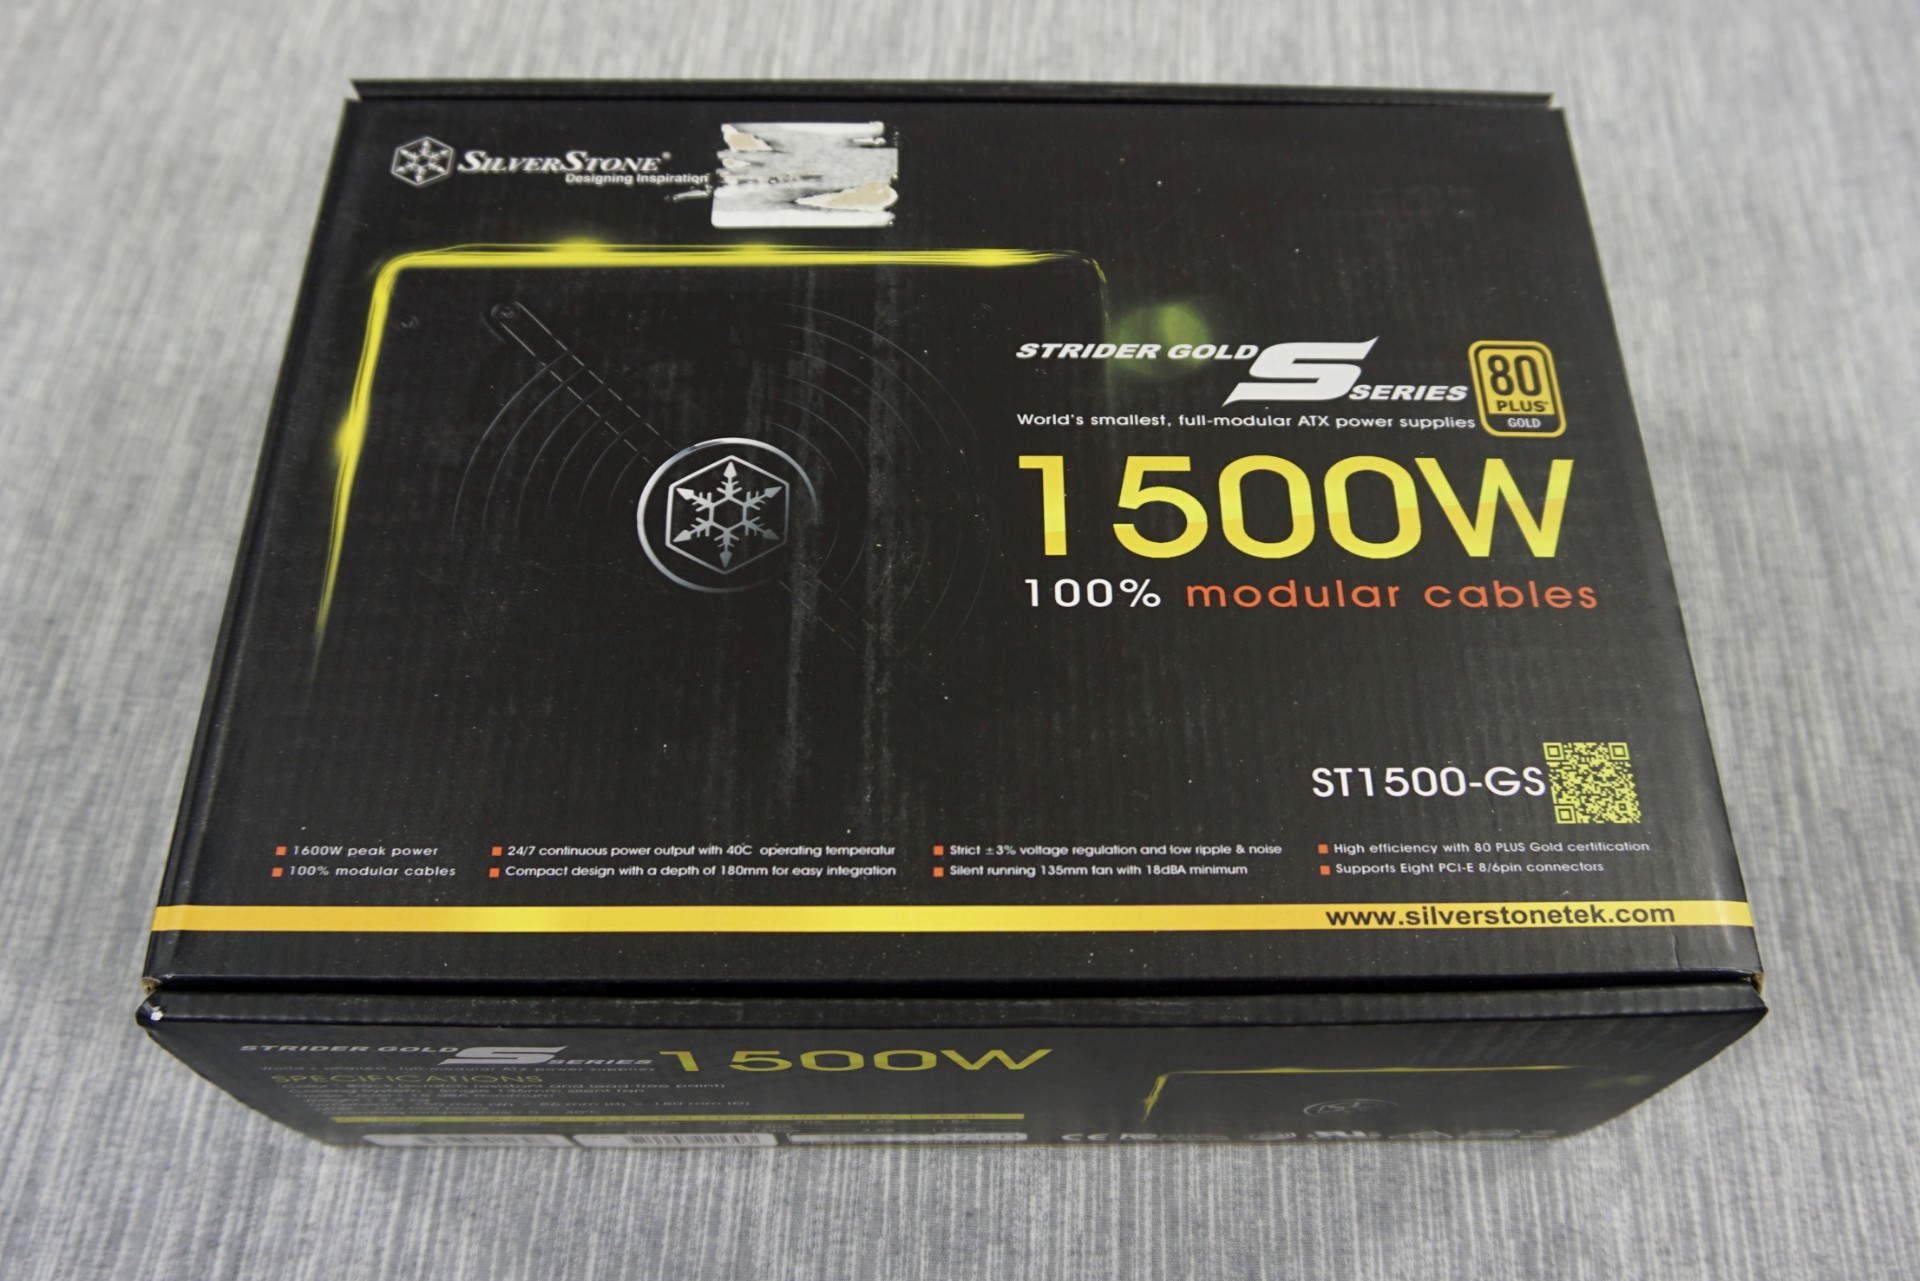 The SilverStone Strider Gold S 1500W PSU Review